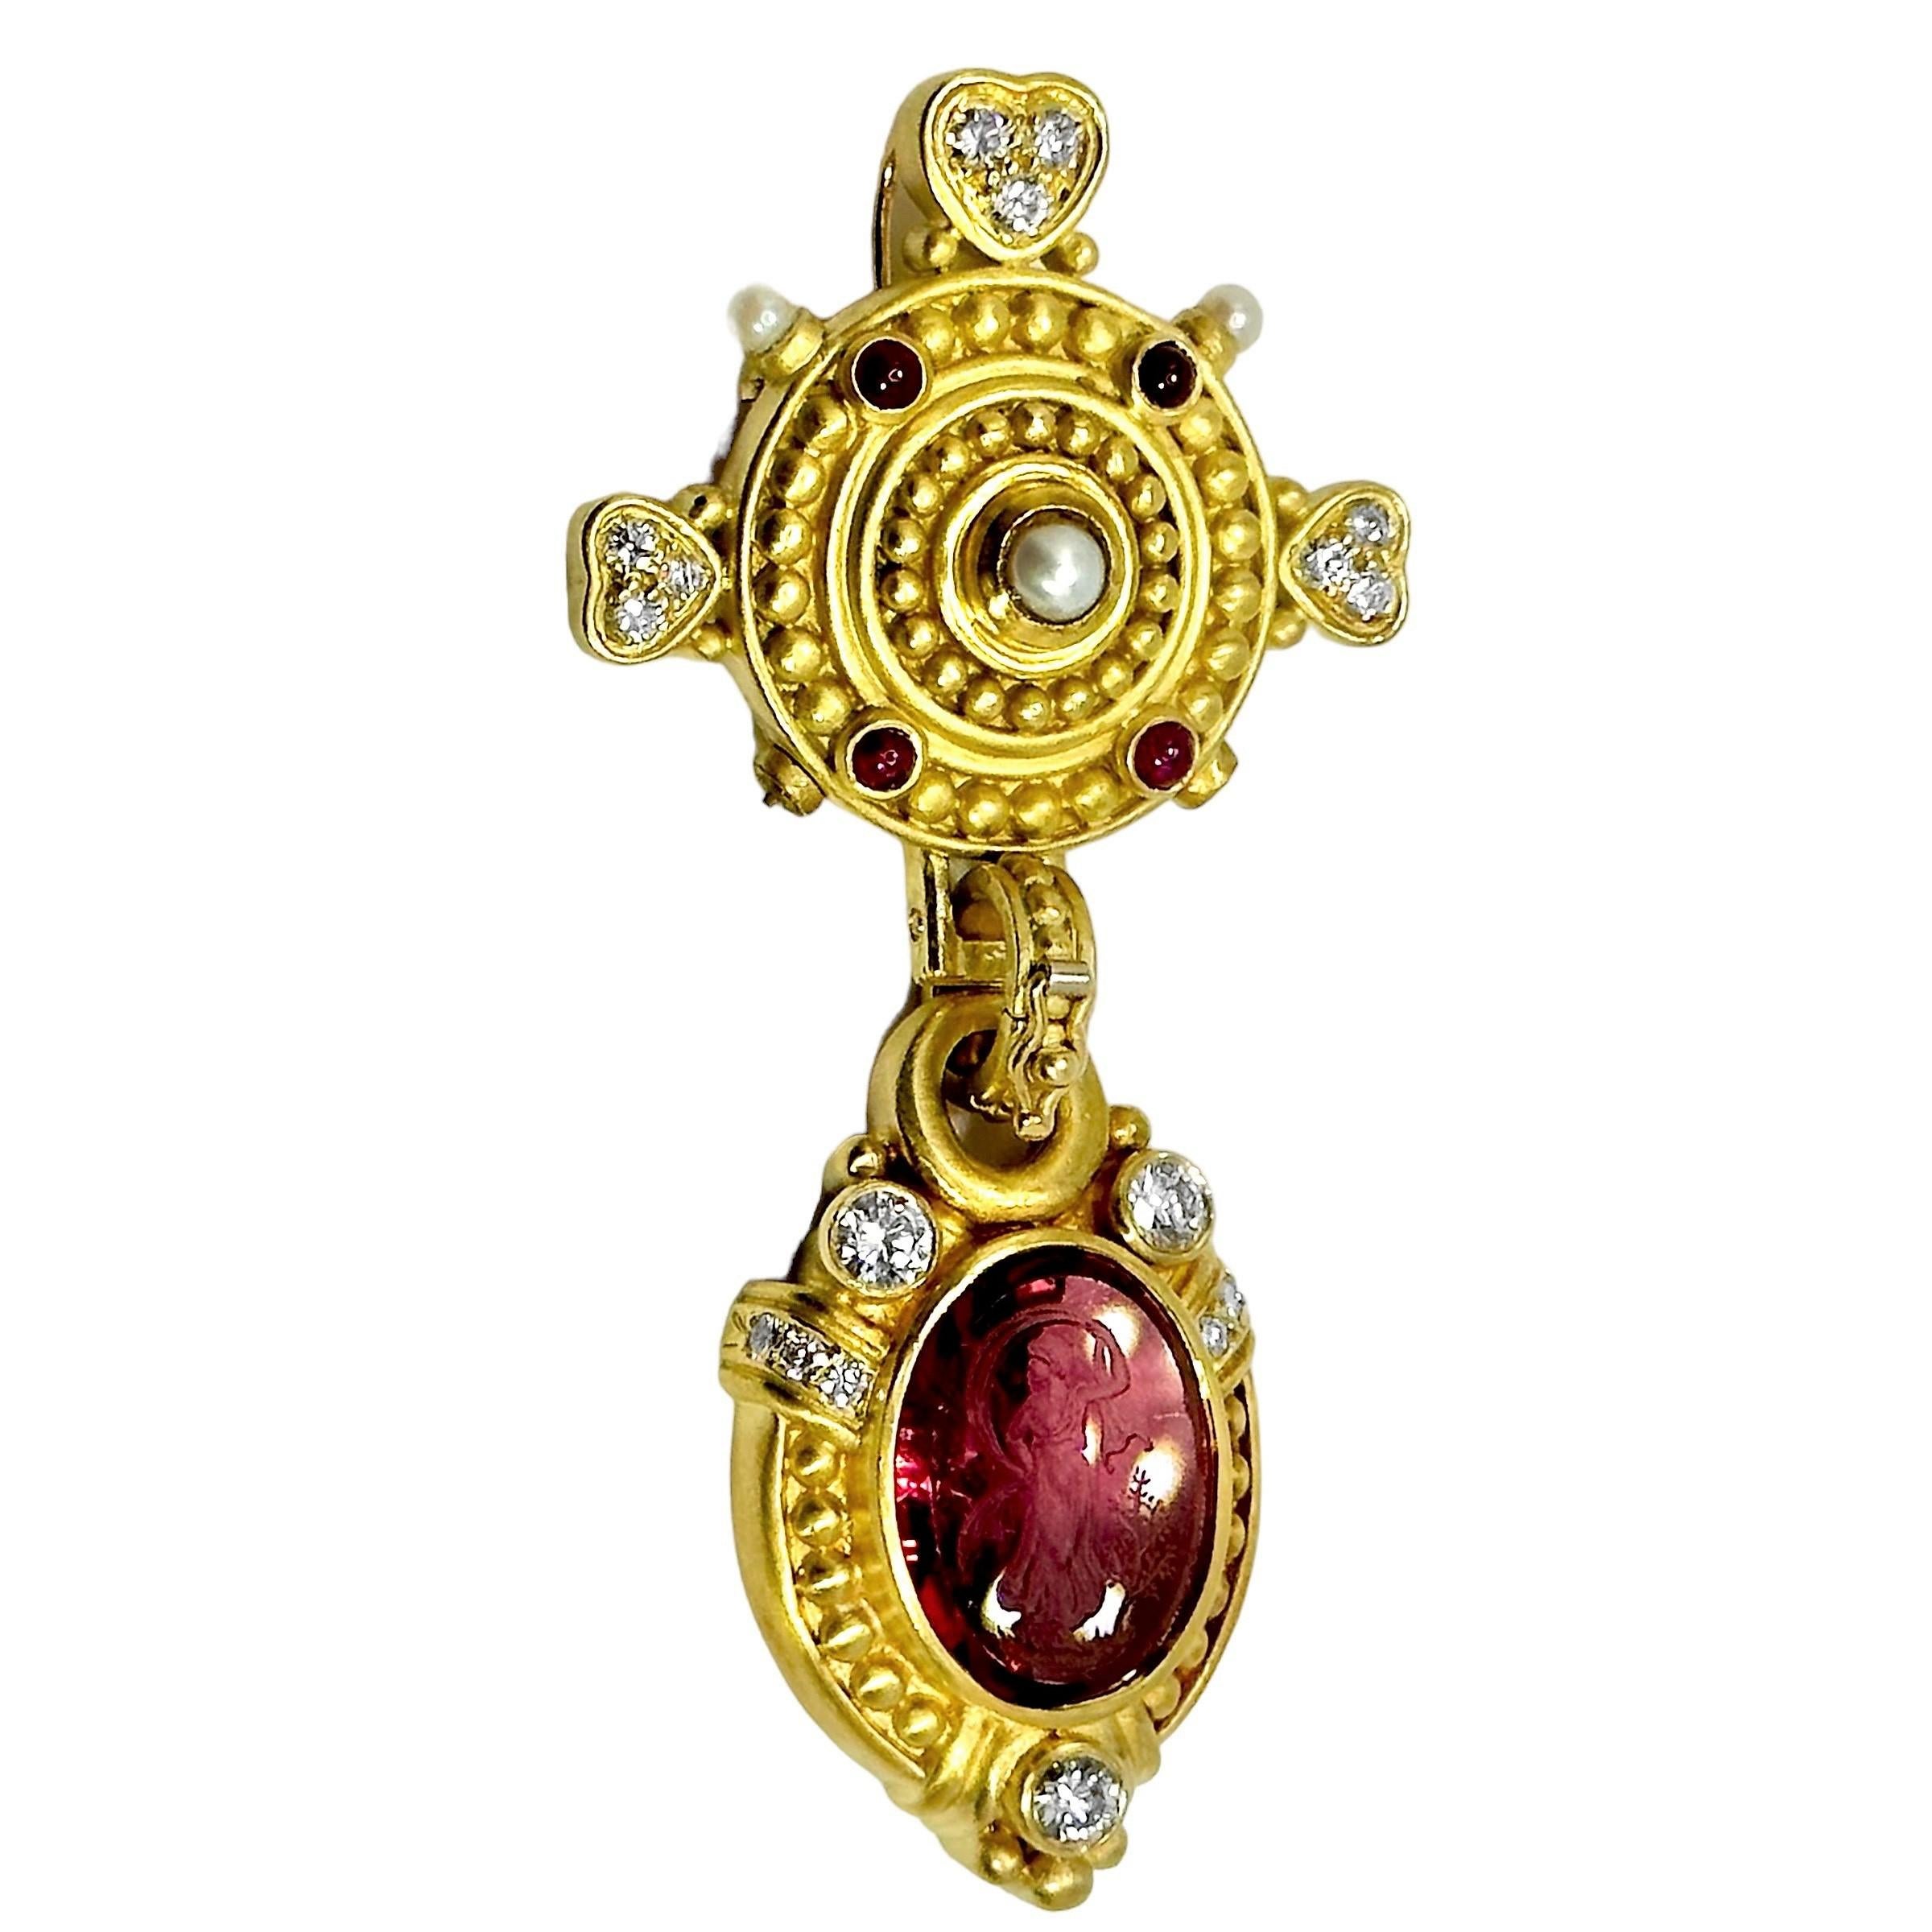 This Judith Ripka Classic Revival style creation is truly elegant. Every surface is executed in satin finish. The many jewels are quite vivid in contrast. On the bottom part is one bezel set, fine, 10ct Rubelite Tourmaline Intaglio surrounded by